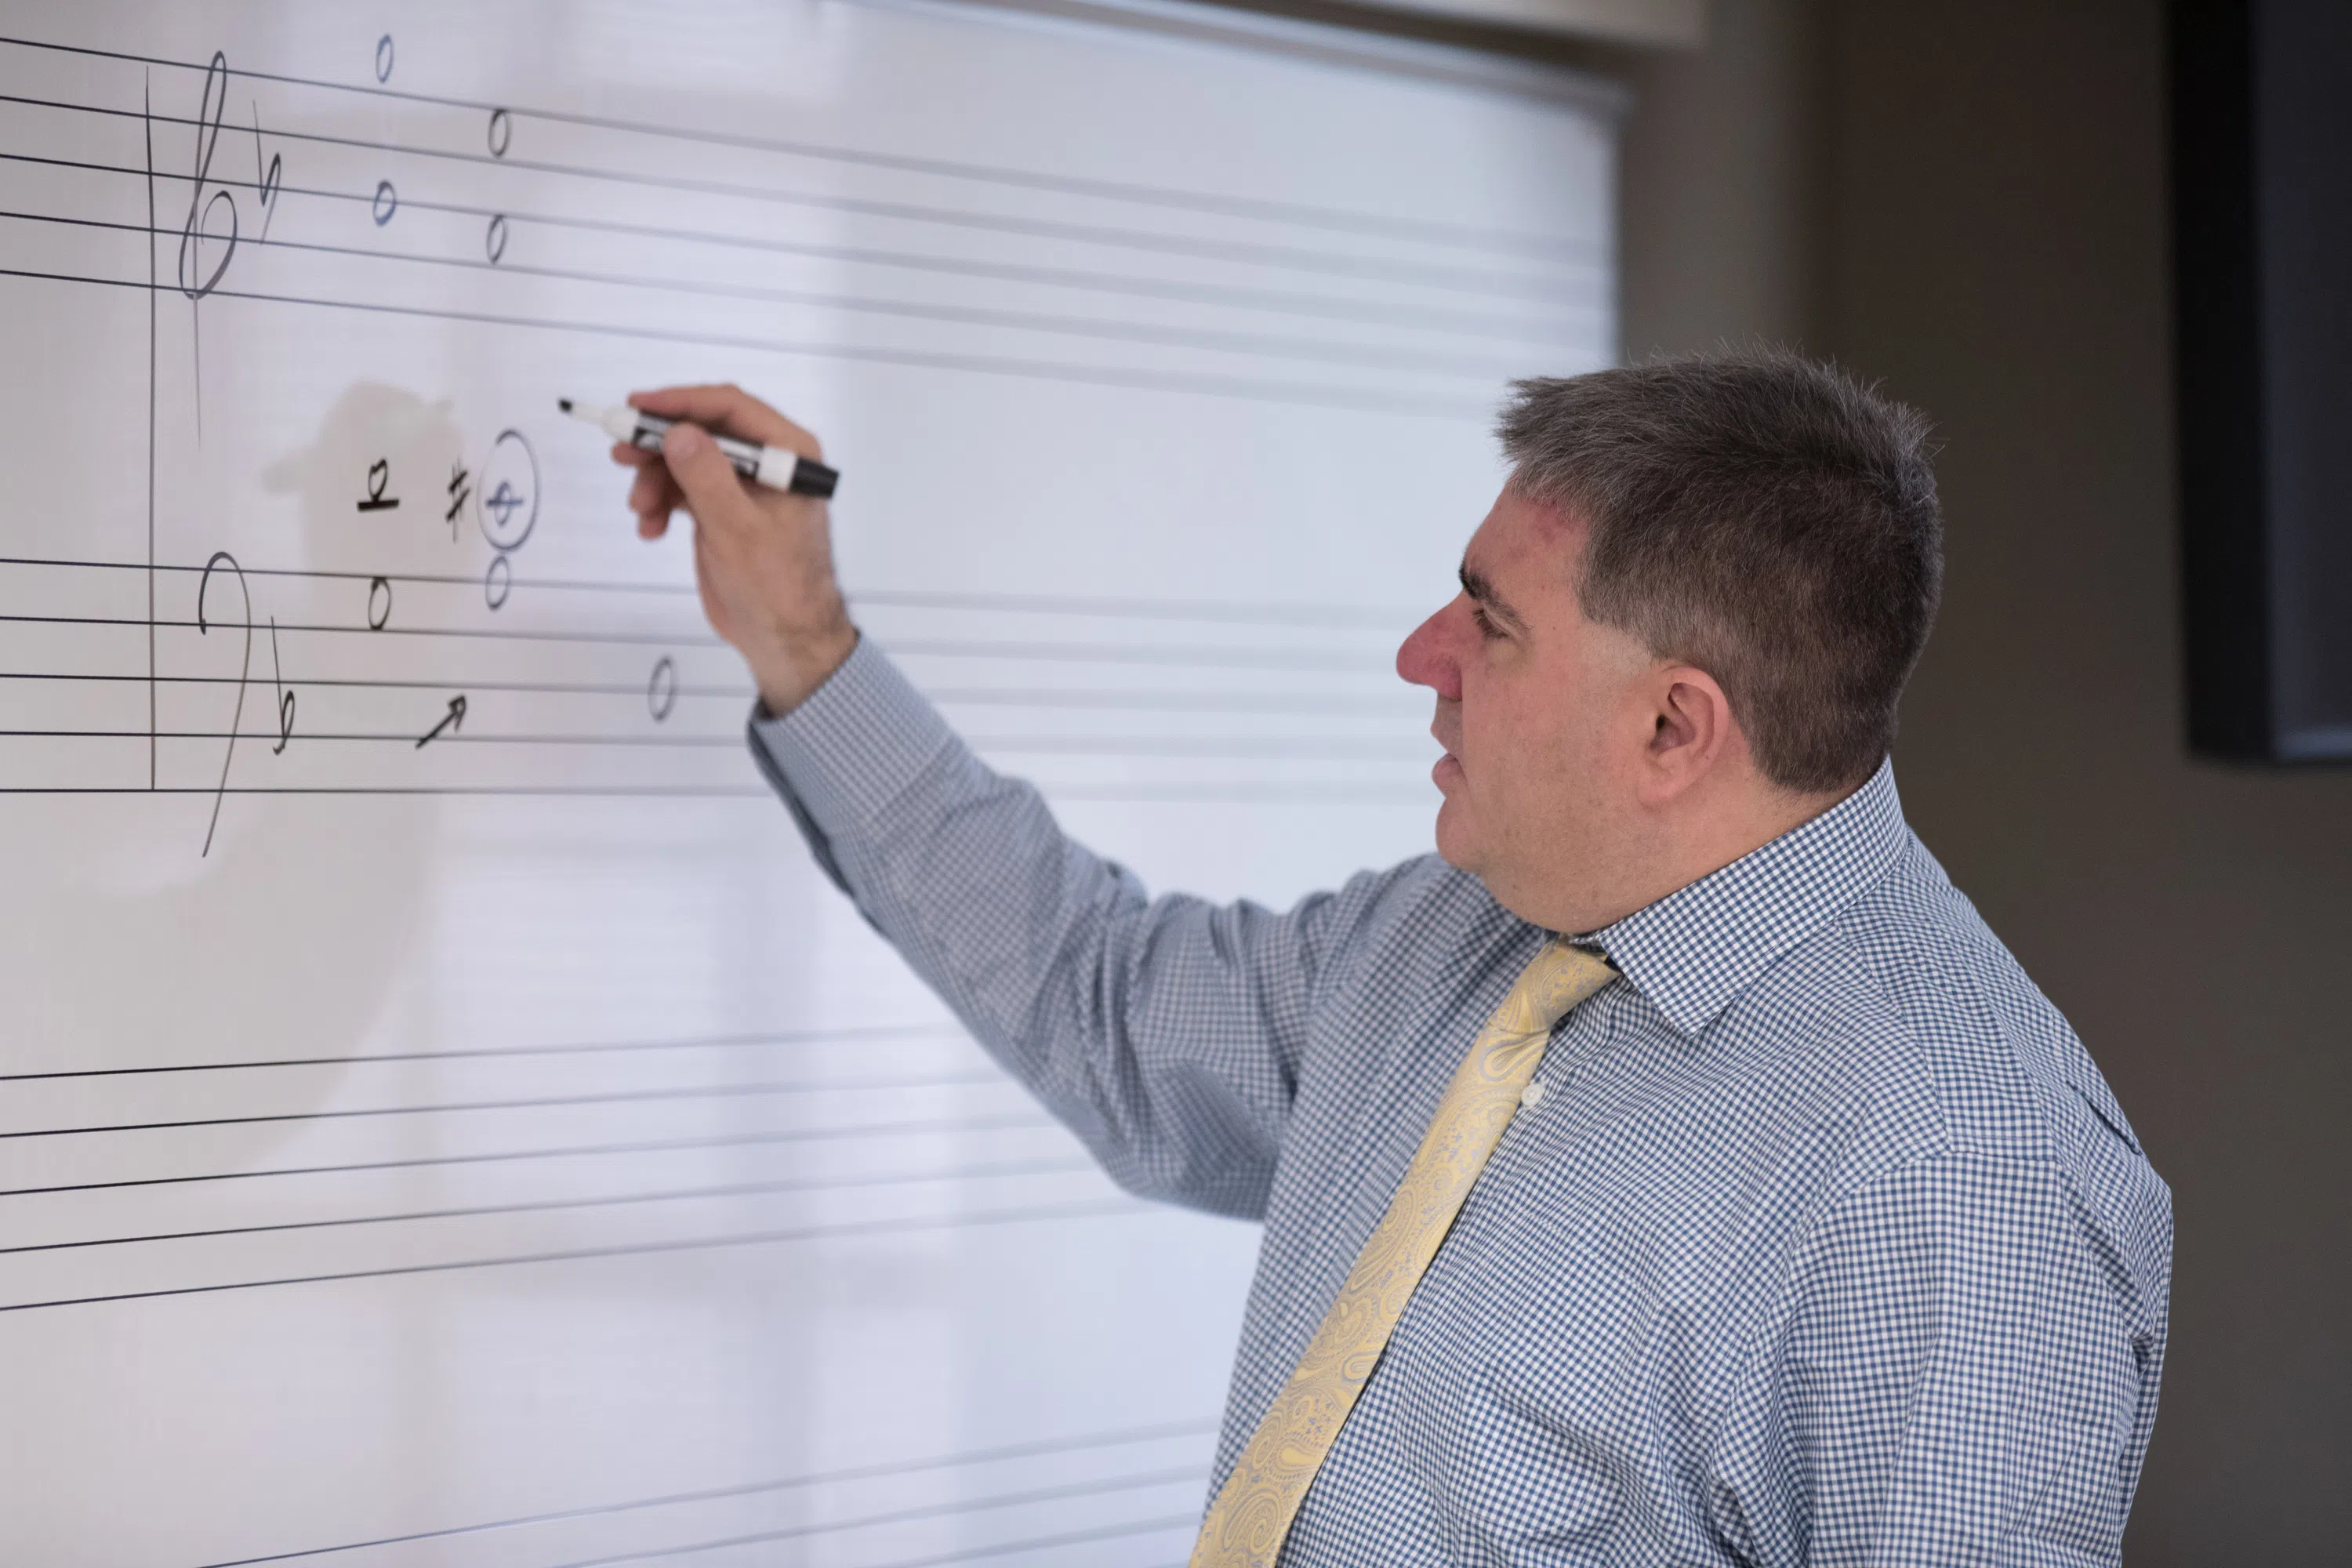 Professor stands at white board with music bars writing music notes with a black marker.